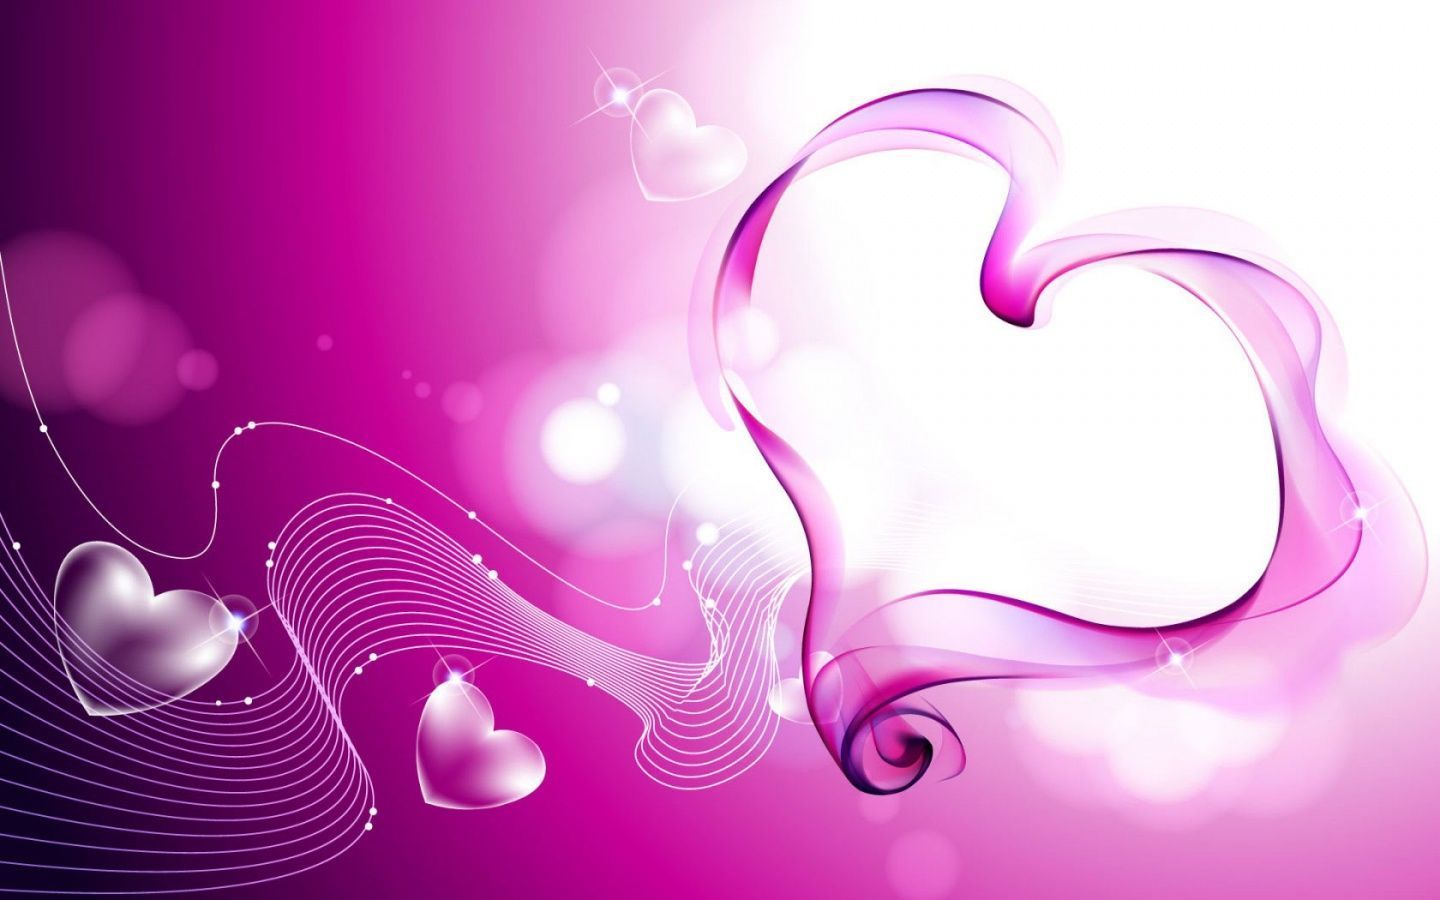 I Love Pink Wallpapers HD Pictures | Live HD Wallpaper HQ Pictures ...